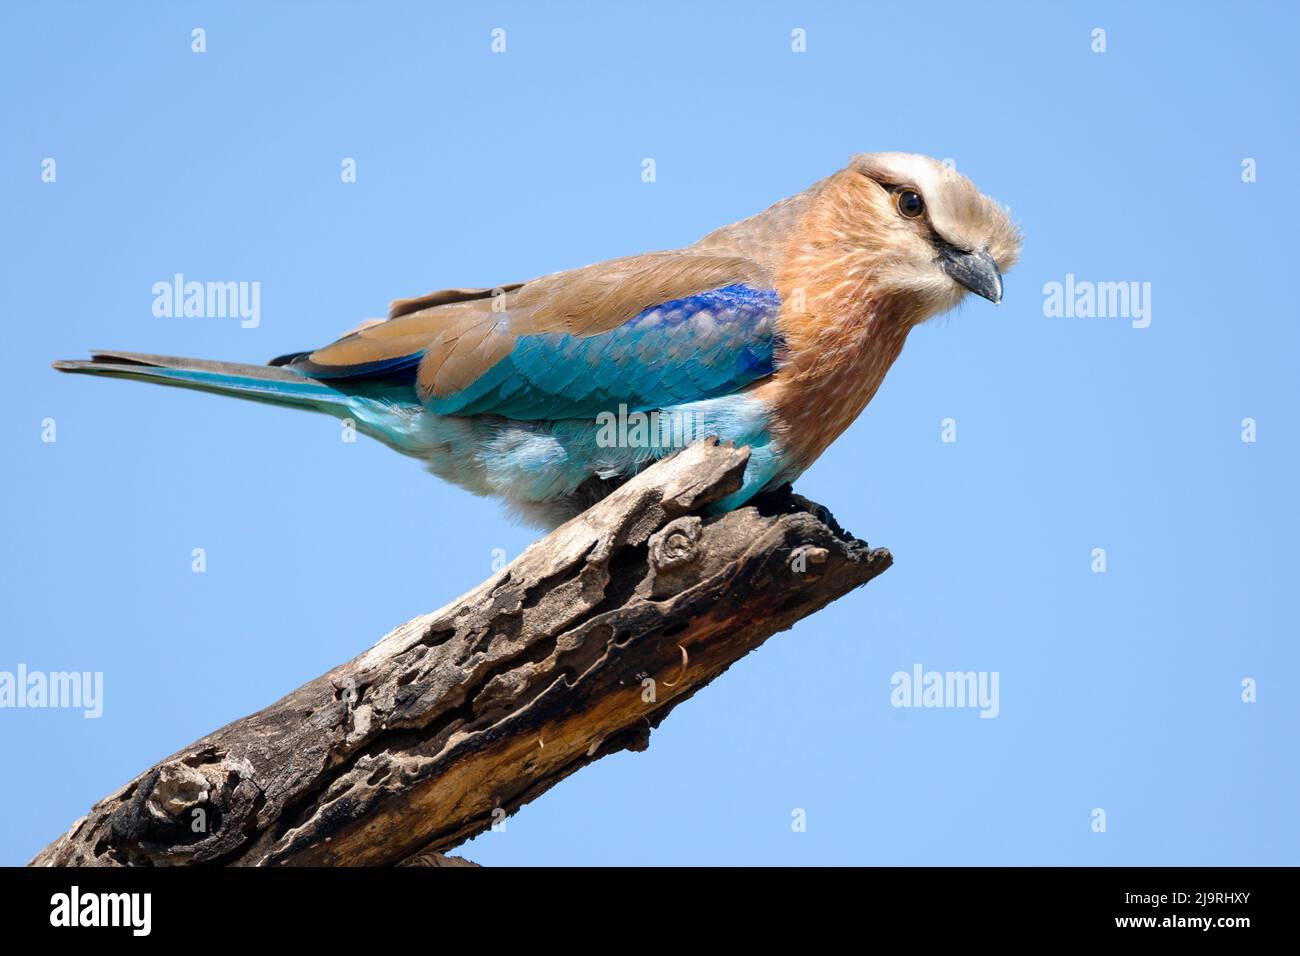 Africa, Tanzania. Portrait of a rufous-crowned roller. Stock Photo